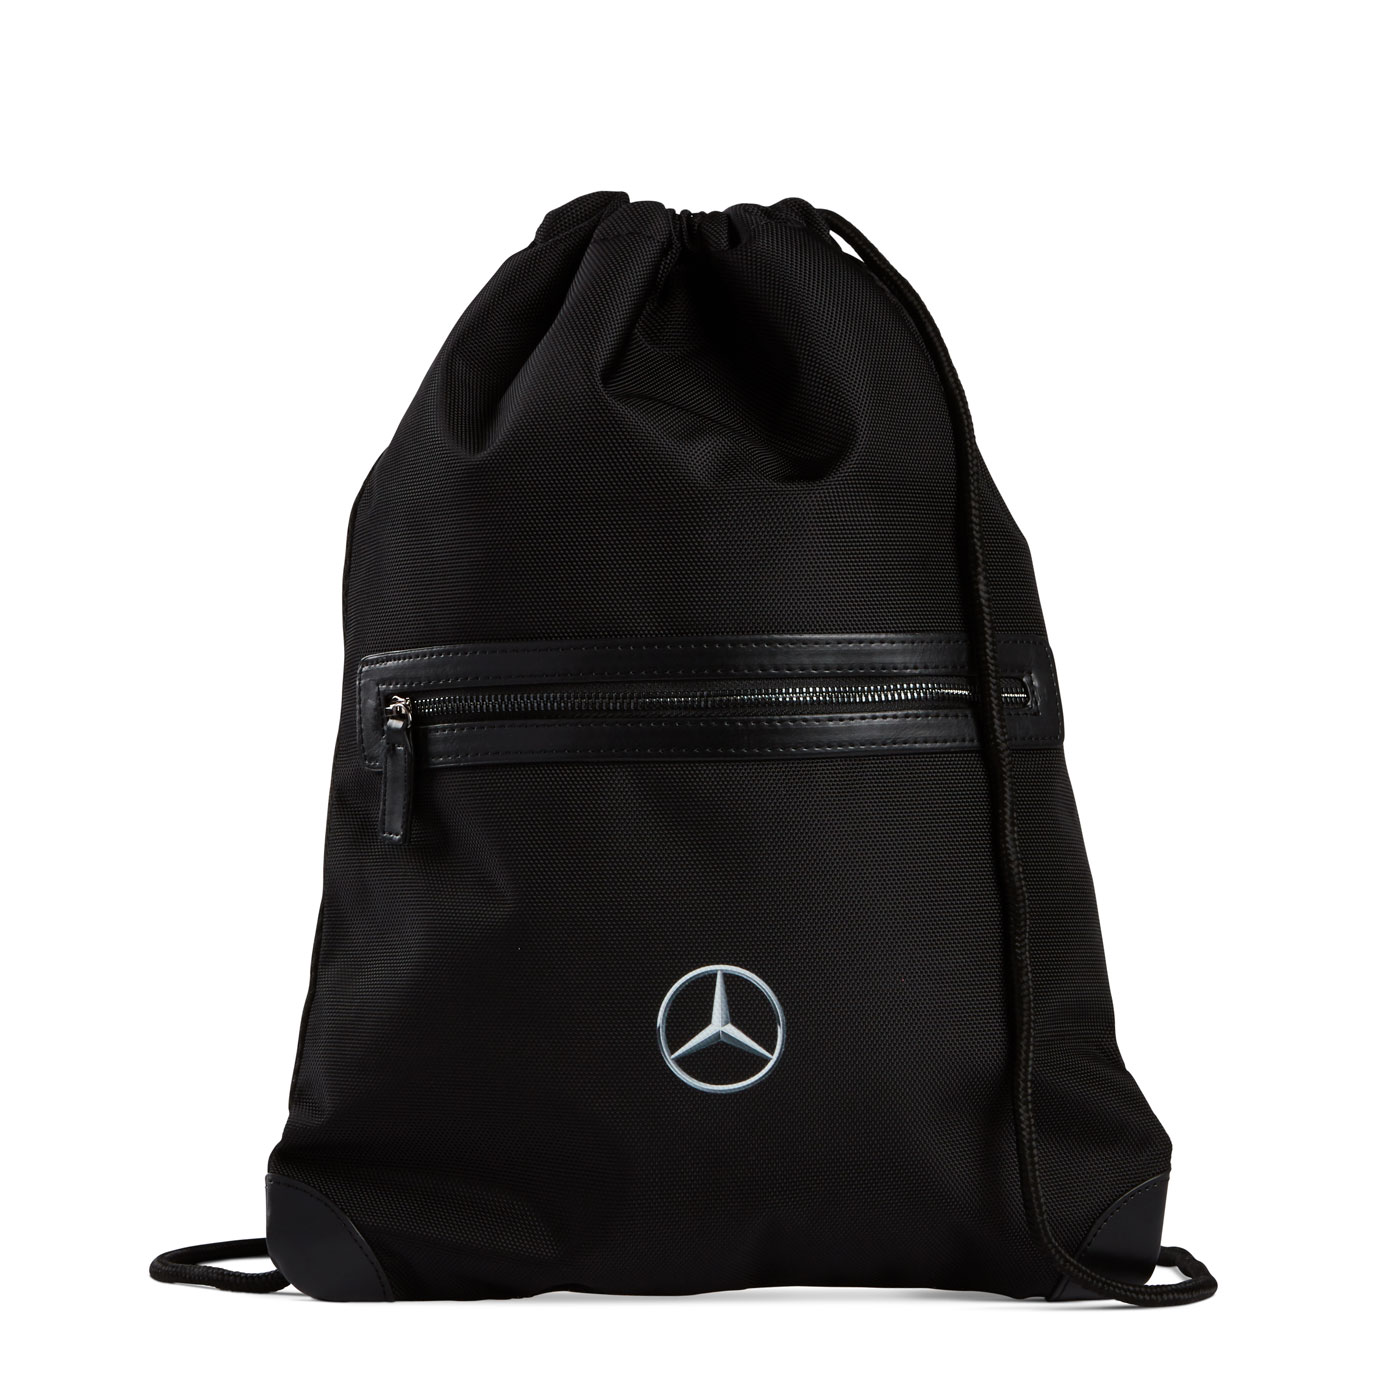 Durable Traveling Bag Printing is Clearly School Bag Unique Style Drawstring Backpack Sport Bag Drawstring Backpack Mercedes-AMG-Logo 